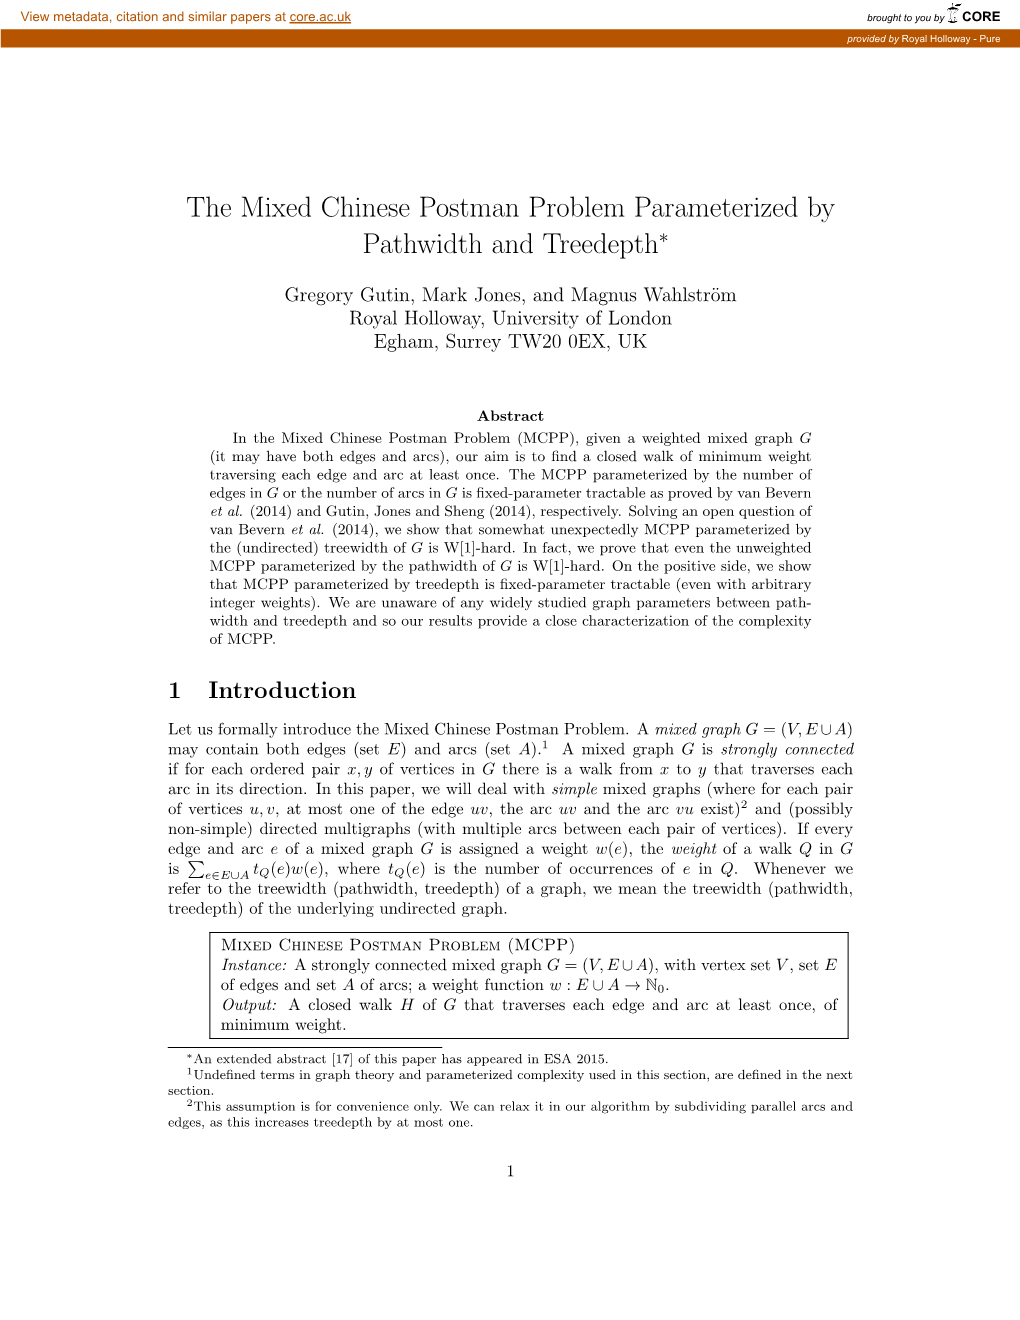 The Mixed Chinese Postman Problem Parameterized by Pathwidth and Treedepth∗